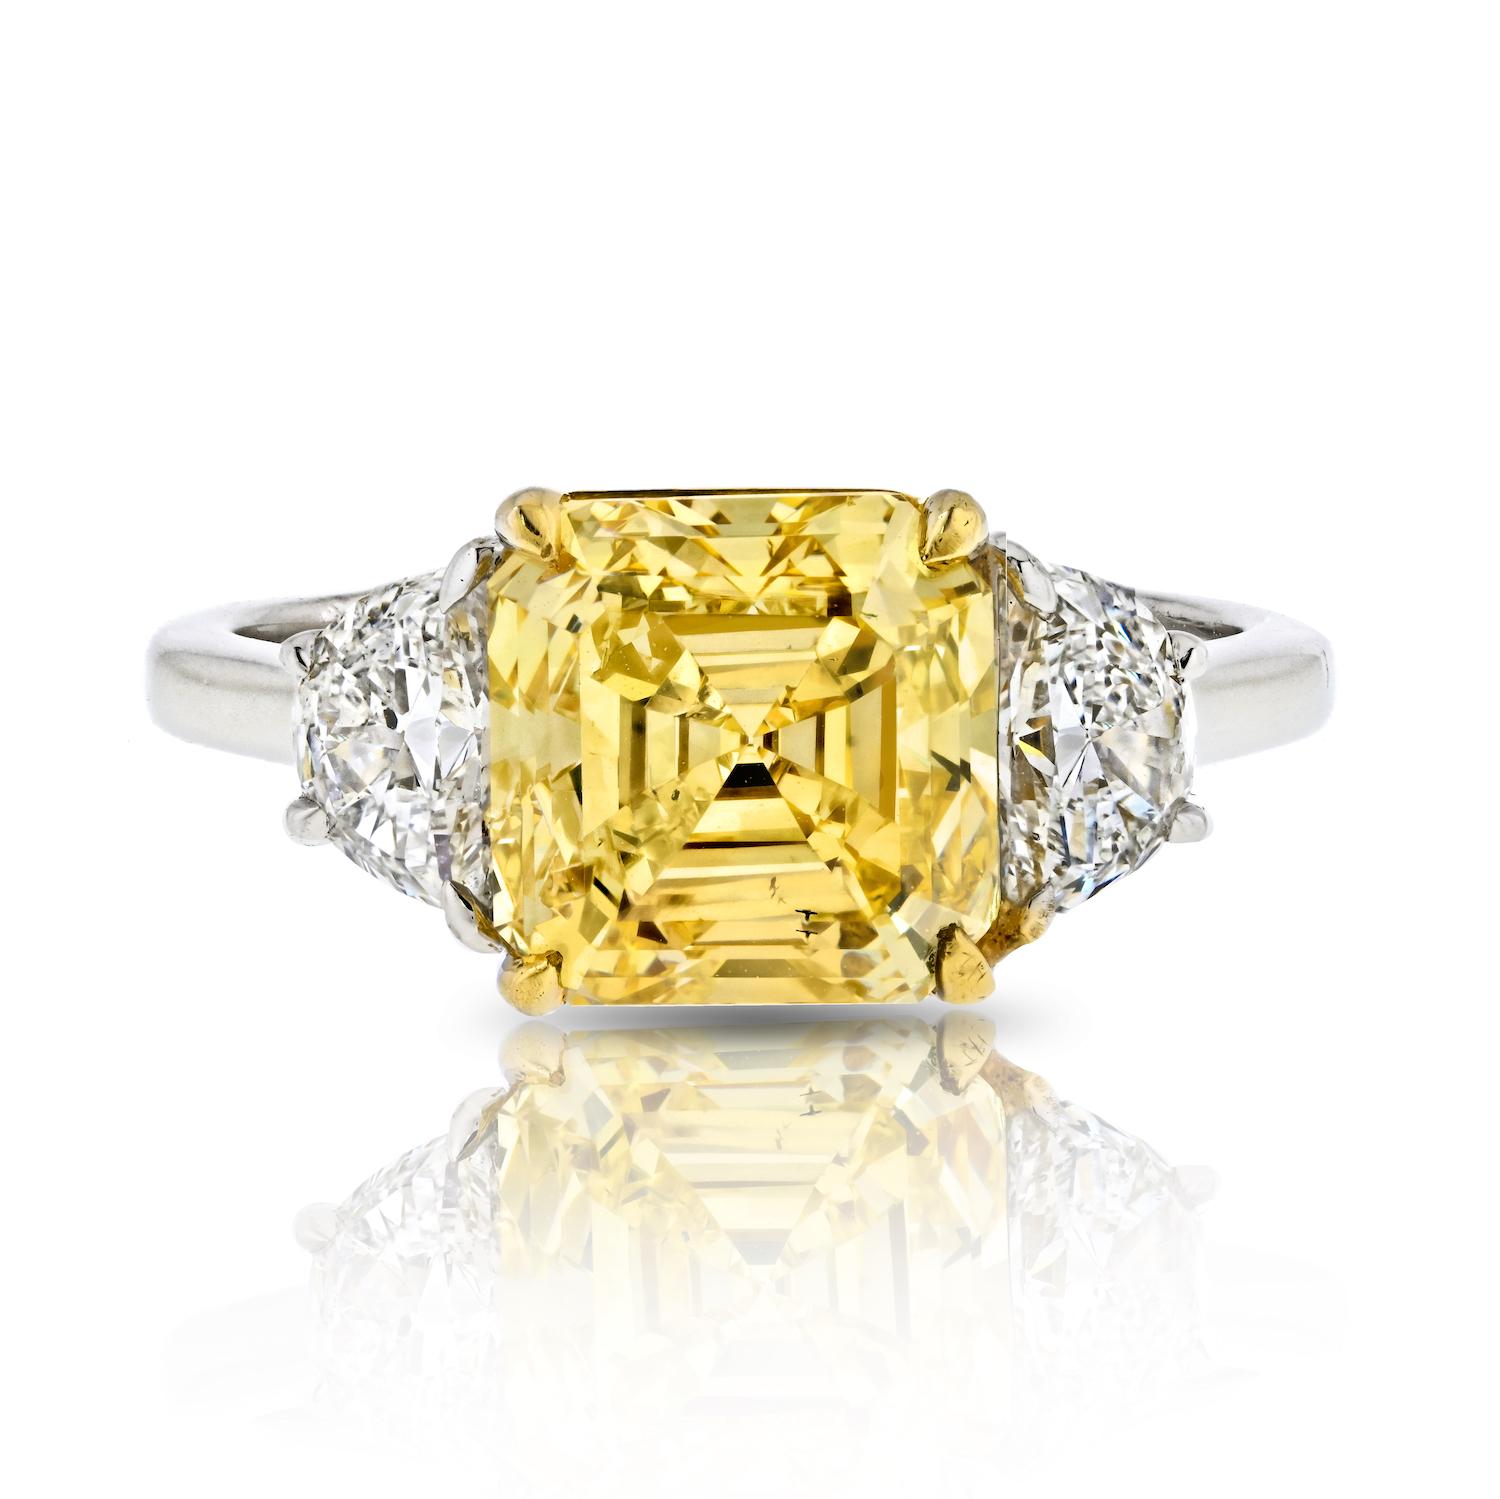 Celebrate your love with the enchanting beauty of this 3.38-carat Fancy Vivid Yellow Asscher Cut Three Stone Diamond Engagement Ring. Meticulously designed, this ring features a captivating center Asscher Cut Diamond and complementary White Half